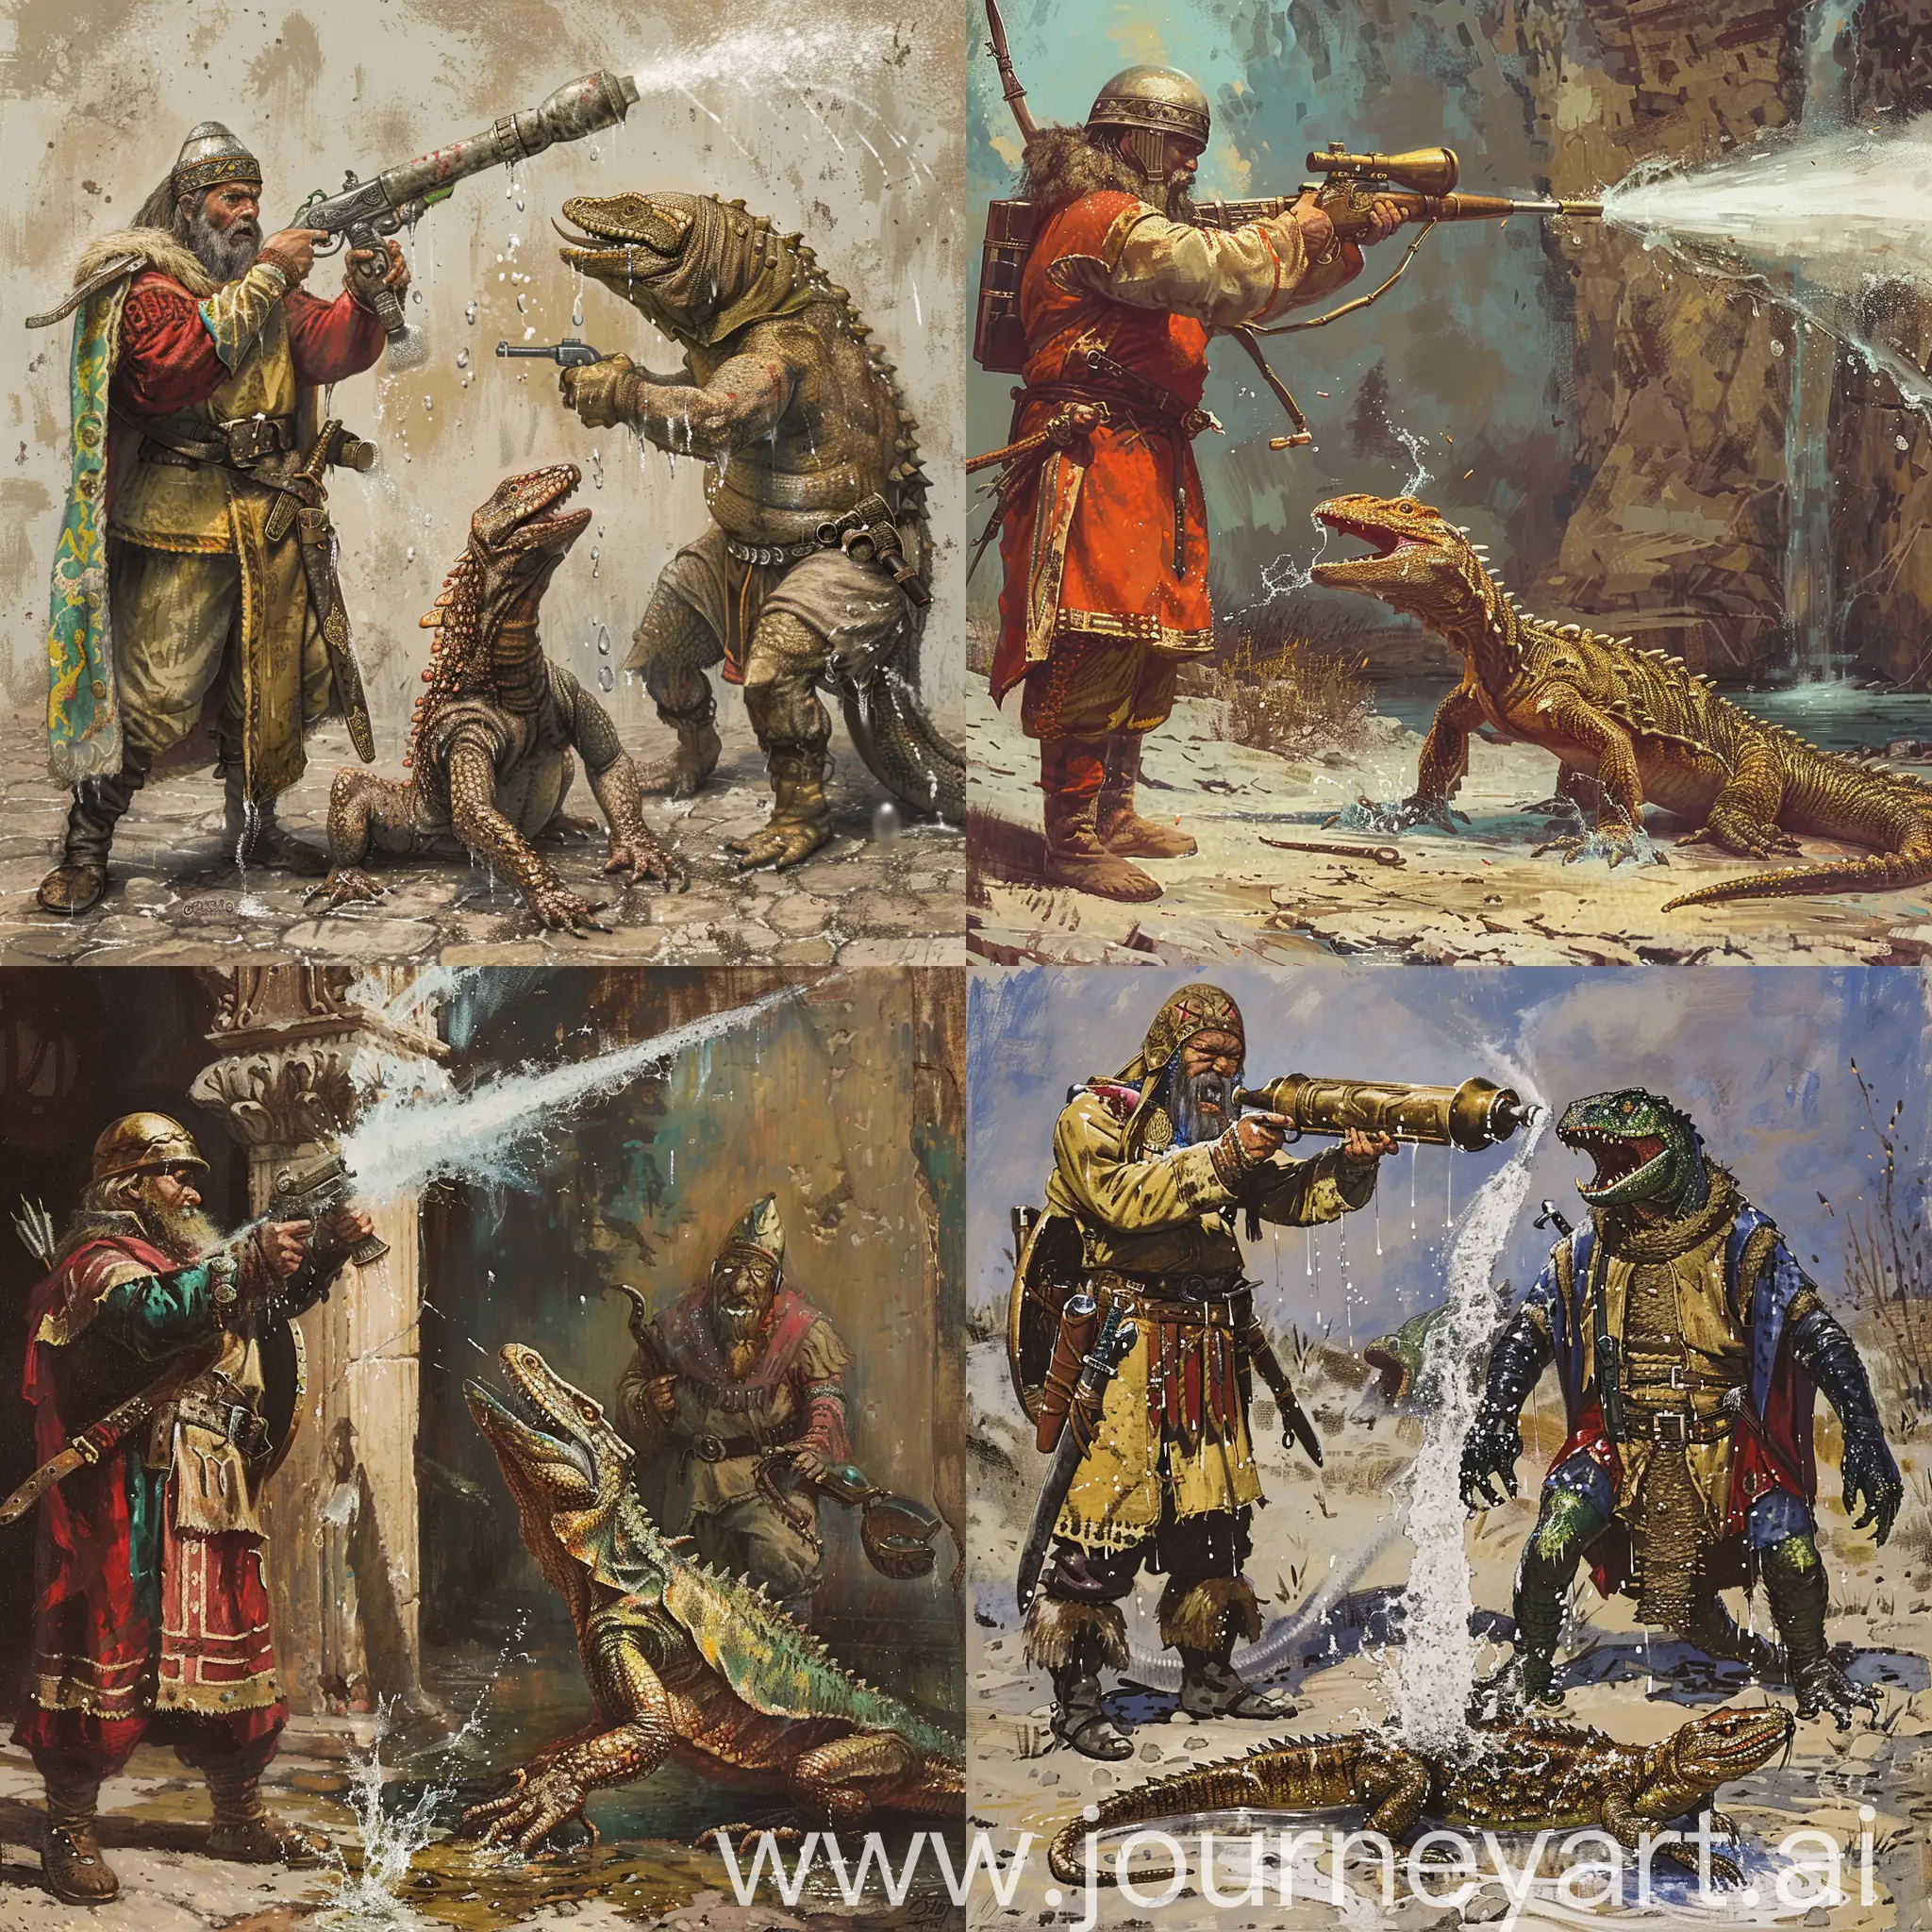 An ancient Russian Slavic warrior in Slavic clothes stands on the left and shoots from a large water pistol, a jet from a water pistol hits right at the feet of a reptilian lizard monster, a reptilian lizard monster is wet